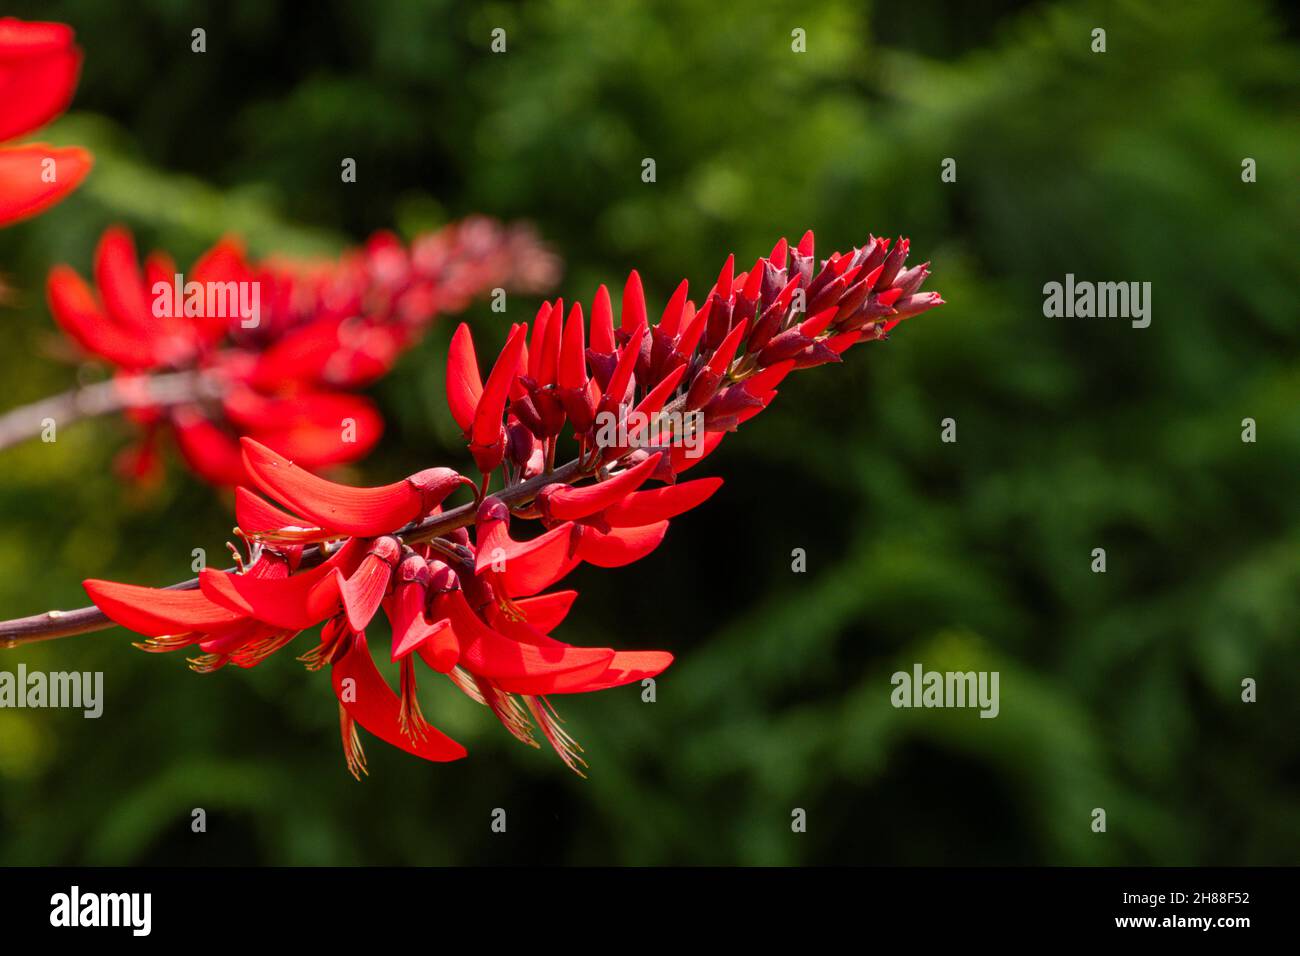 Indian coral tree flowering in summer Stock Photo